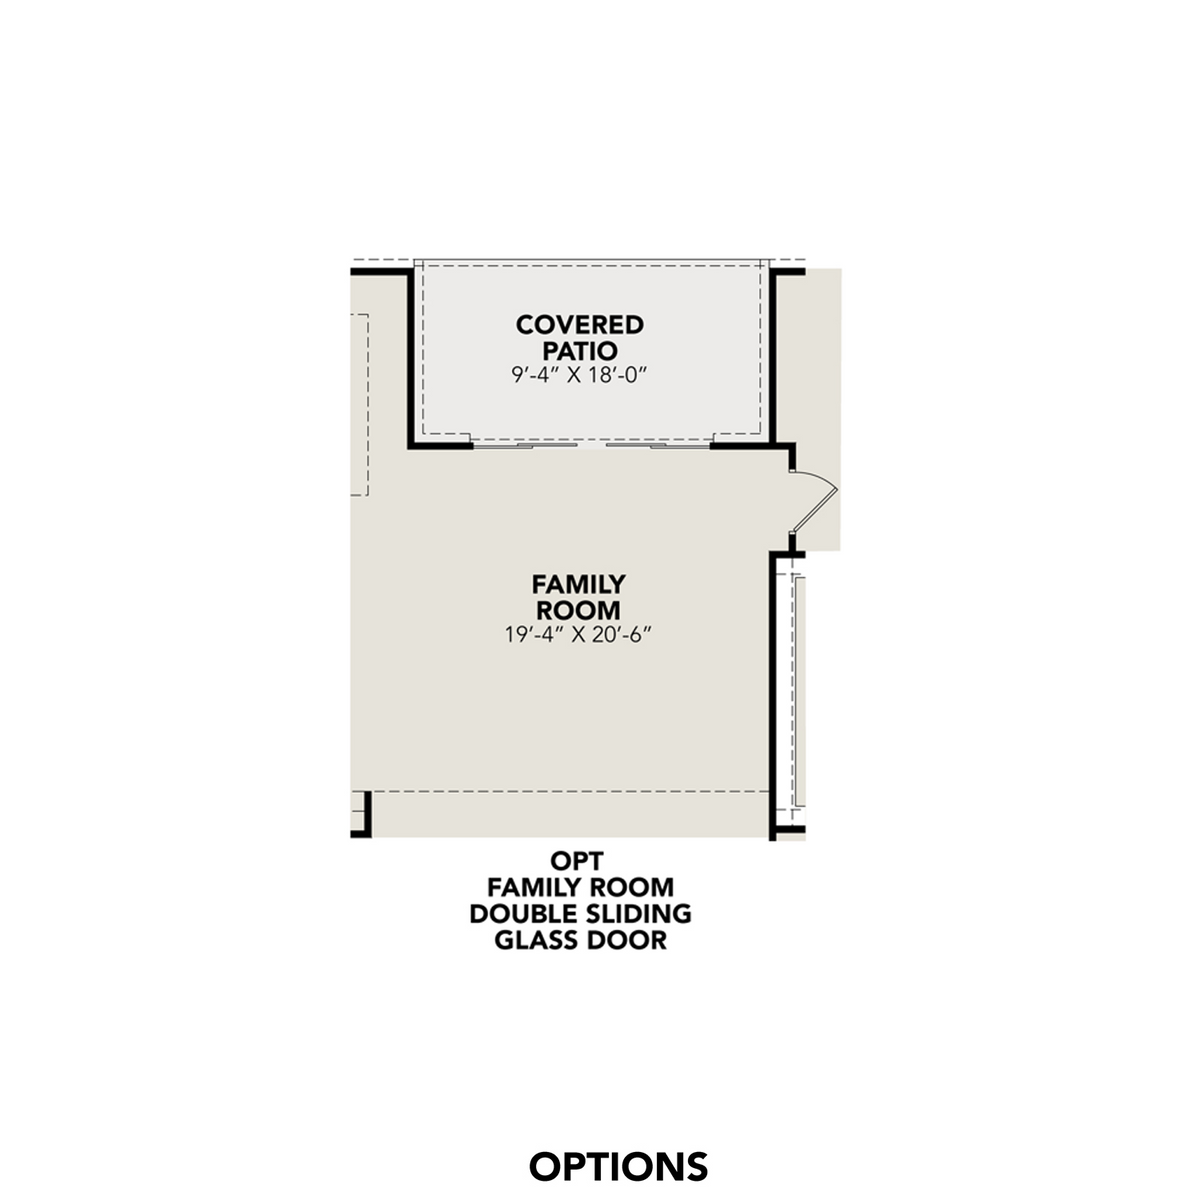 5 - The Jennings G floor plan layout for 248 Jereth Crossing in Davidson Homes' The Reserve at Potranco Oaks community.